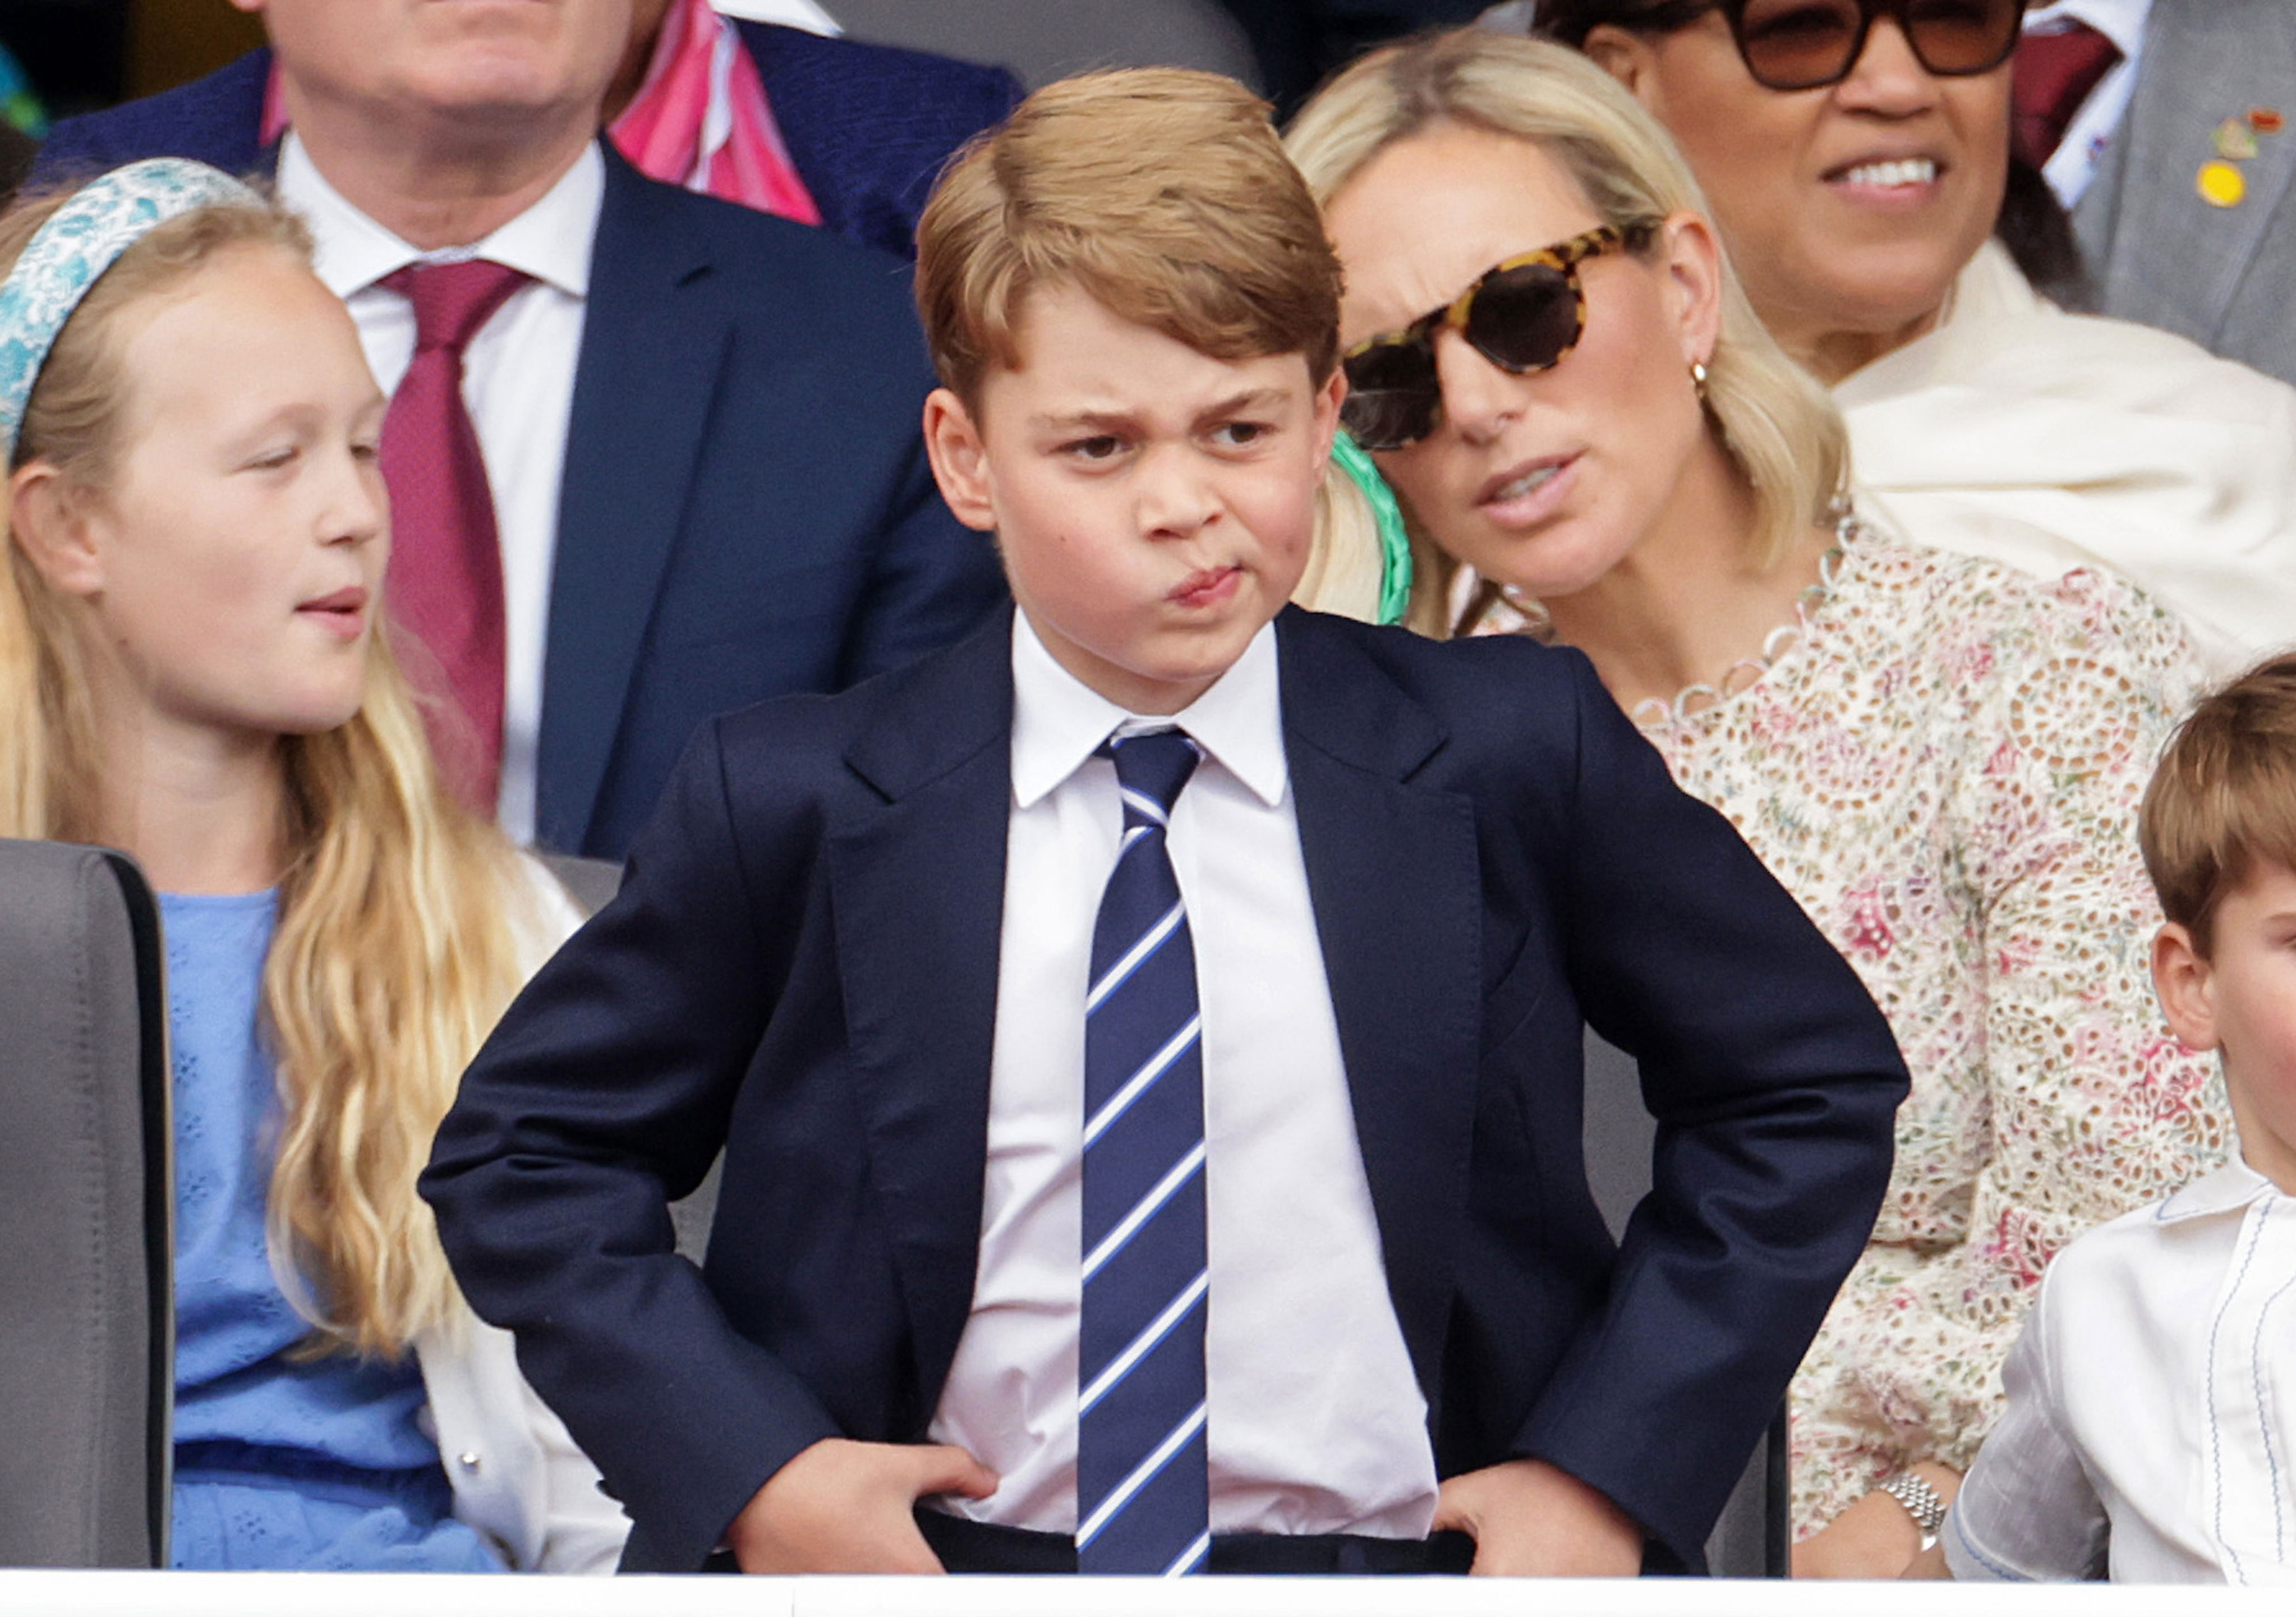 <p>Prince George pondered his feelings while watching the Platinum Pageant in London, the final event celebrating Queen Elizabeth II's <a href="https://www.wonderwall.com/celebrity/royals/platinum-jubilee-see-the-best-photos-from-4-days-of-celebrations-marking-the-queens-70-year-reign-606239.gallery">Platinum Jubilee marking 70 years on the throne</a>, on June 5, 2022. Cousins Savannah Phillips and Zara Tindall sat in the row behind him.</p>